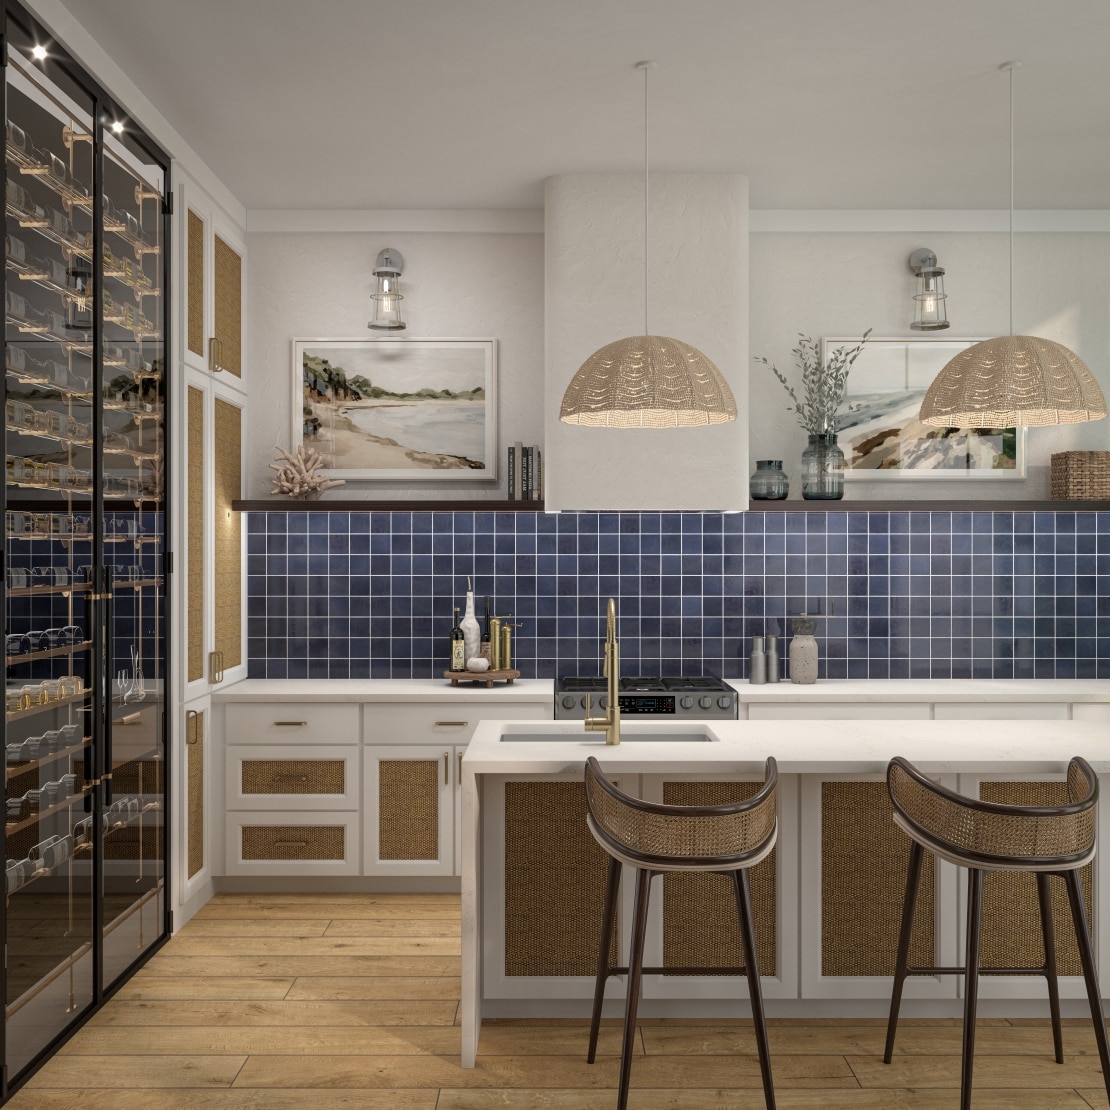 Residential kitchen with blue backsplash, rattan and white cabinets with a large wine fridge.